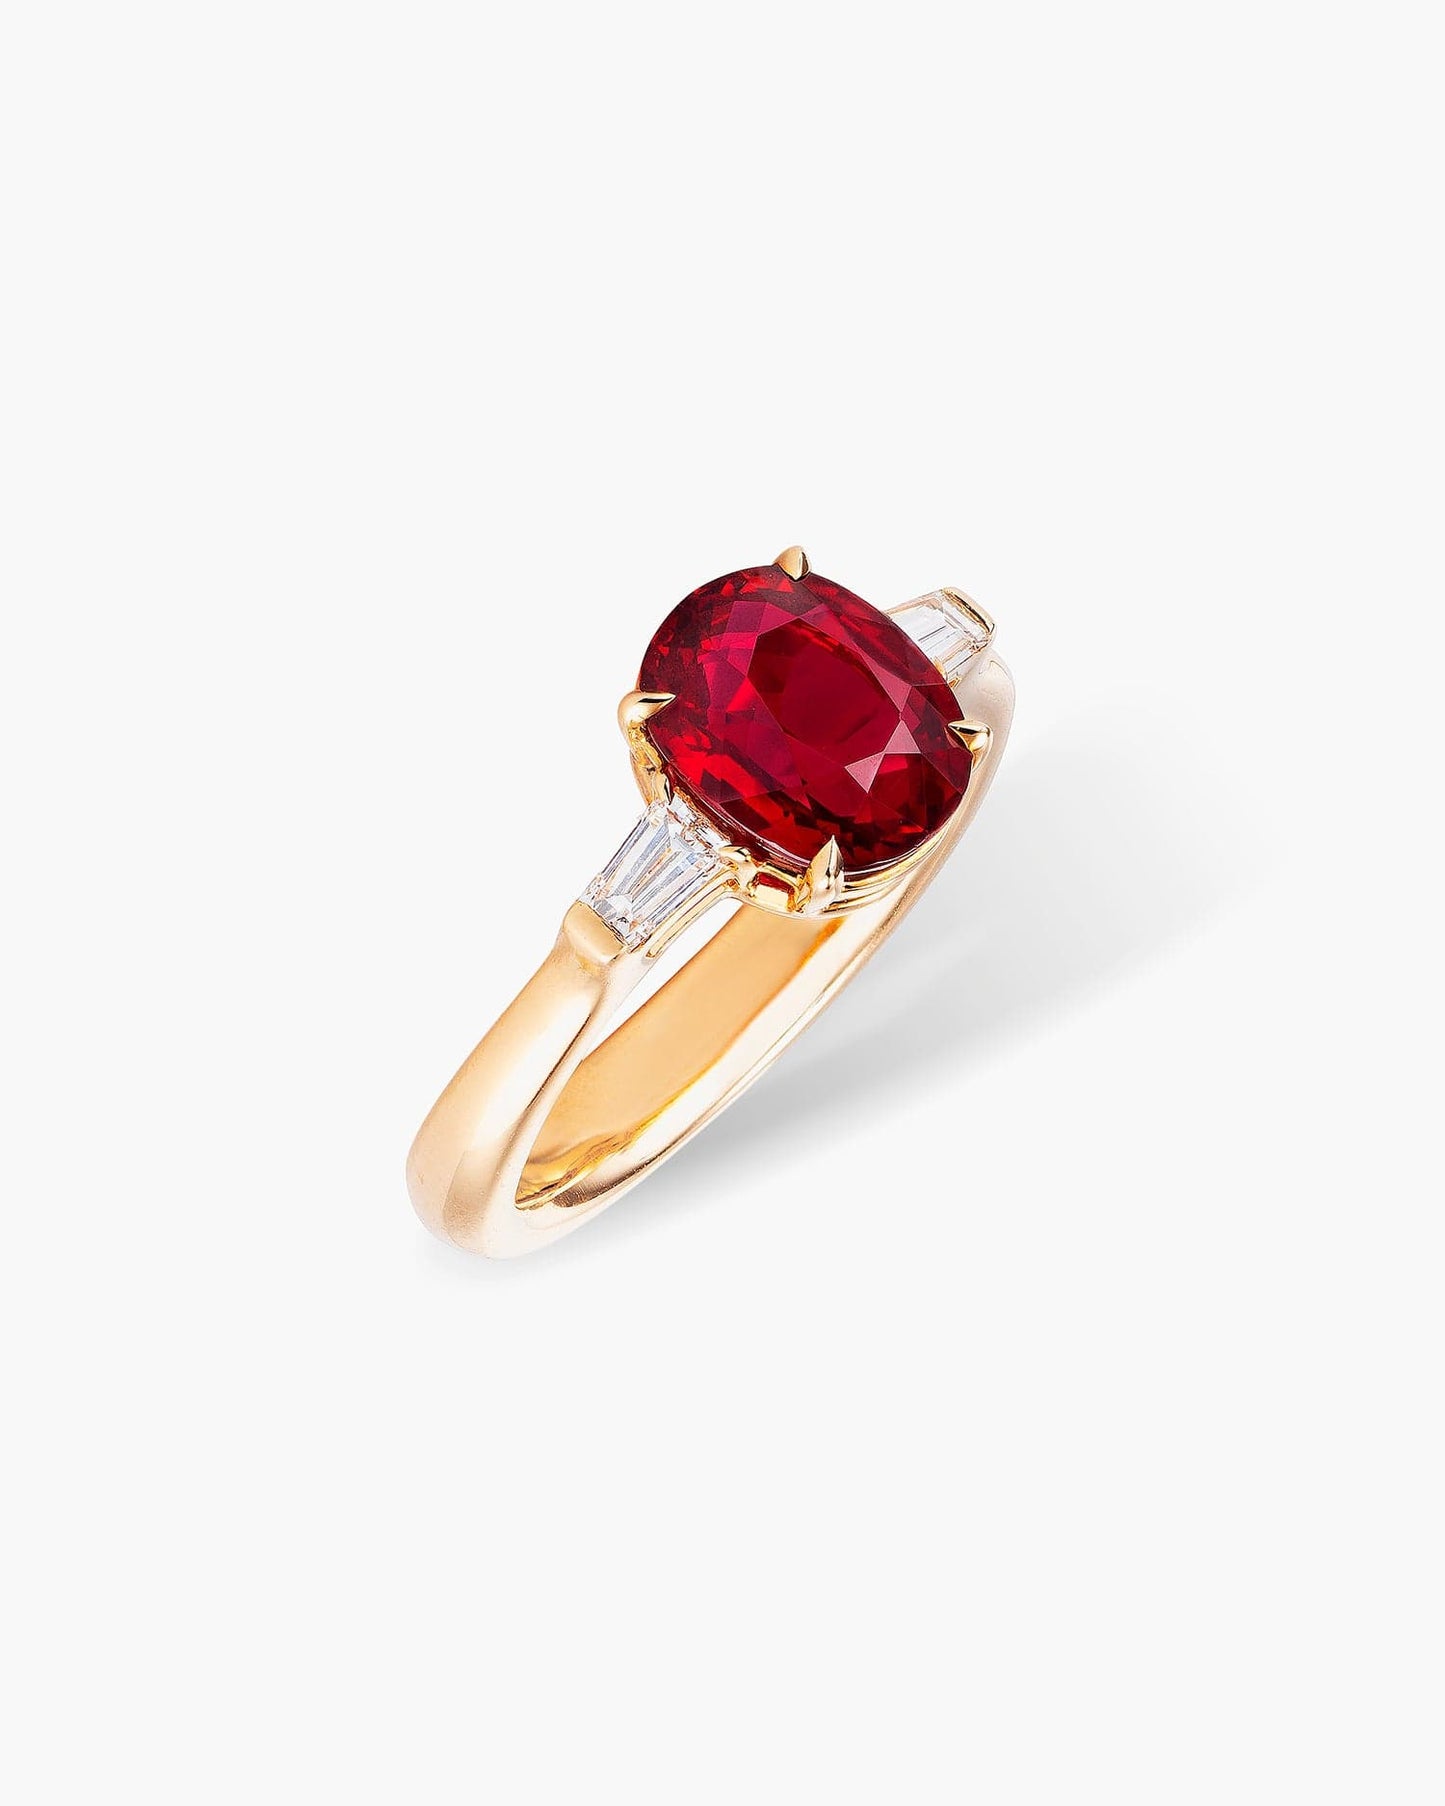 2.54 carat Oval Shape Mozambique Ruby and Diamond Ring